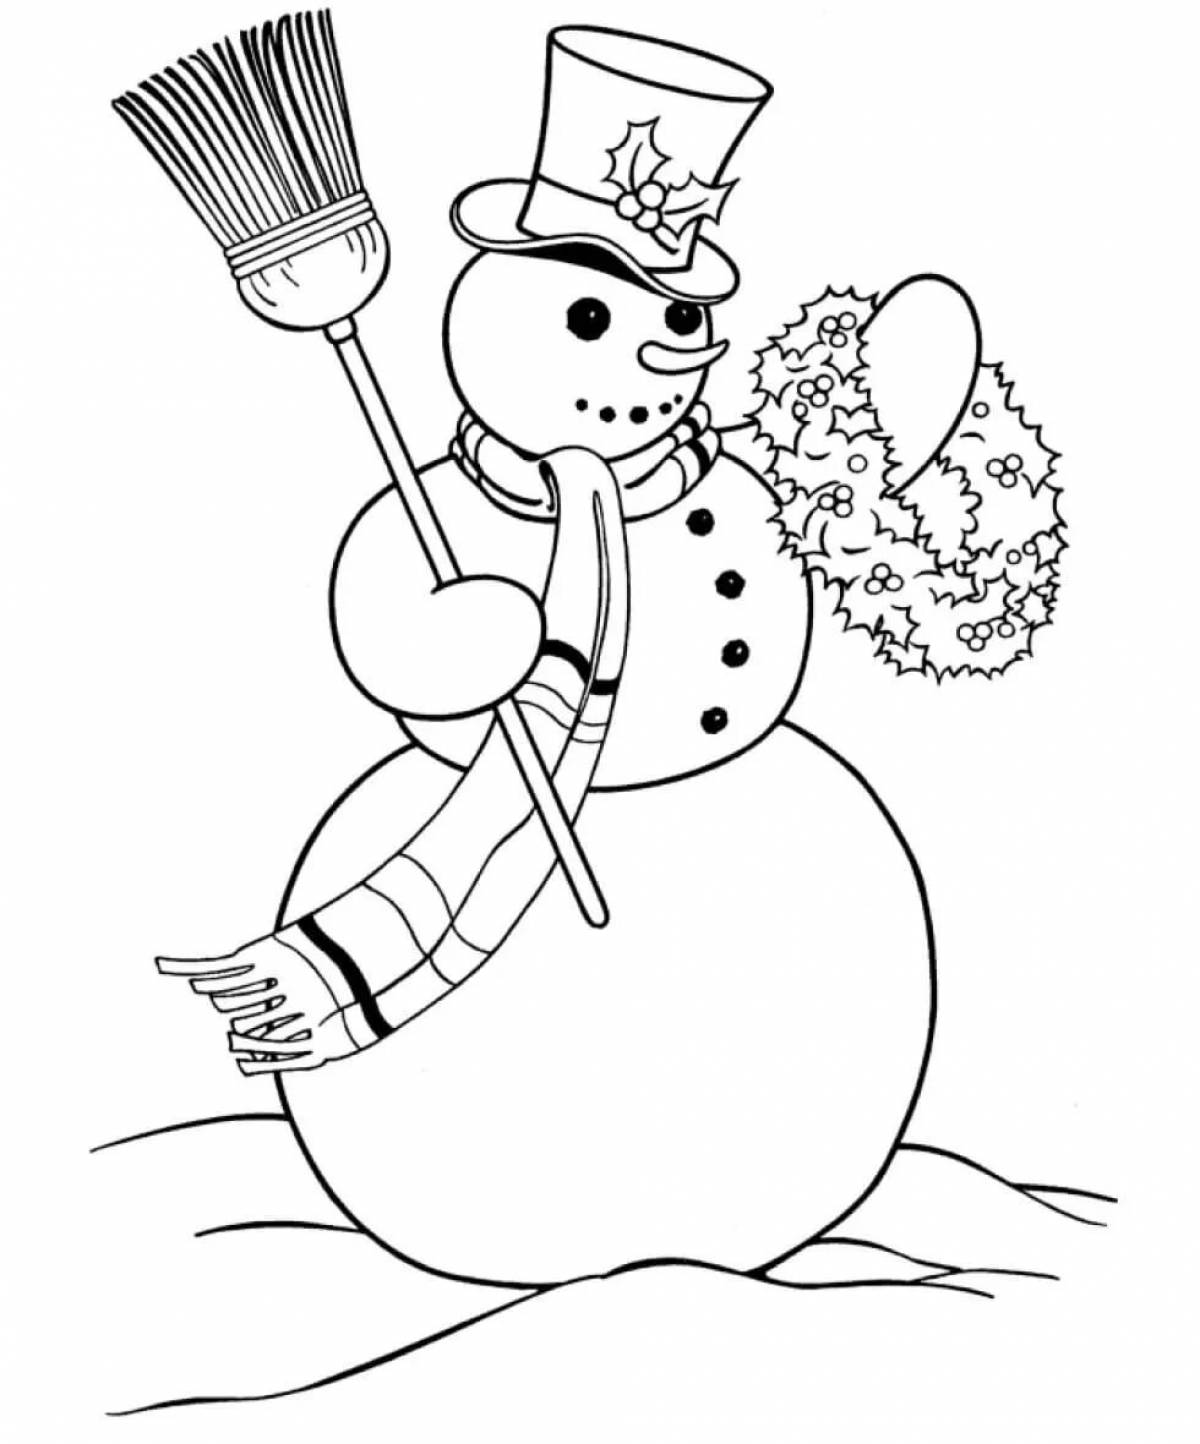 Funny snowman for kids #5